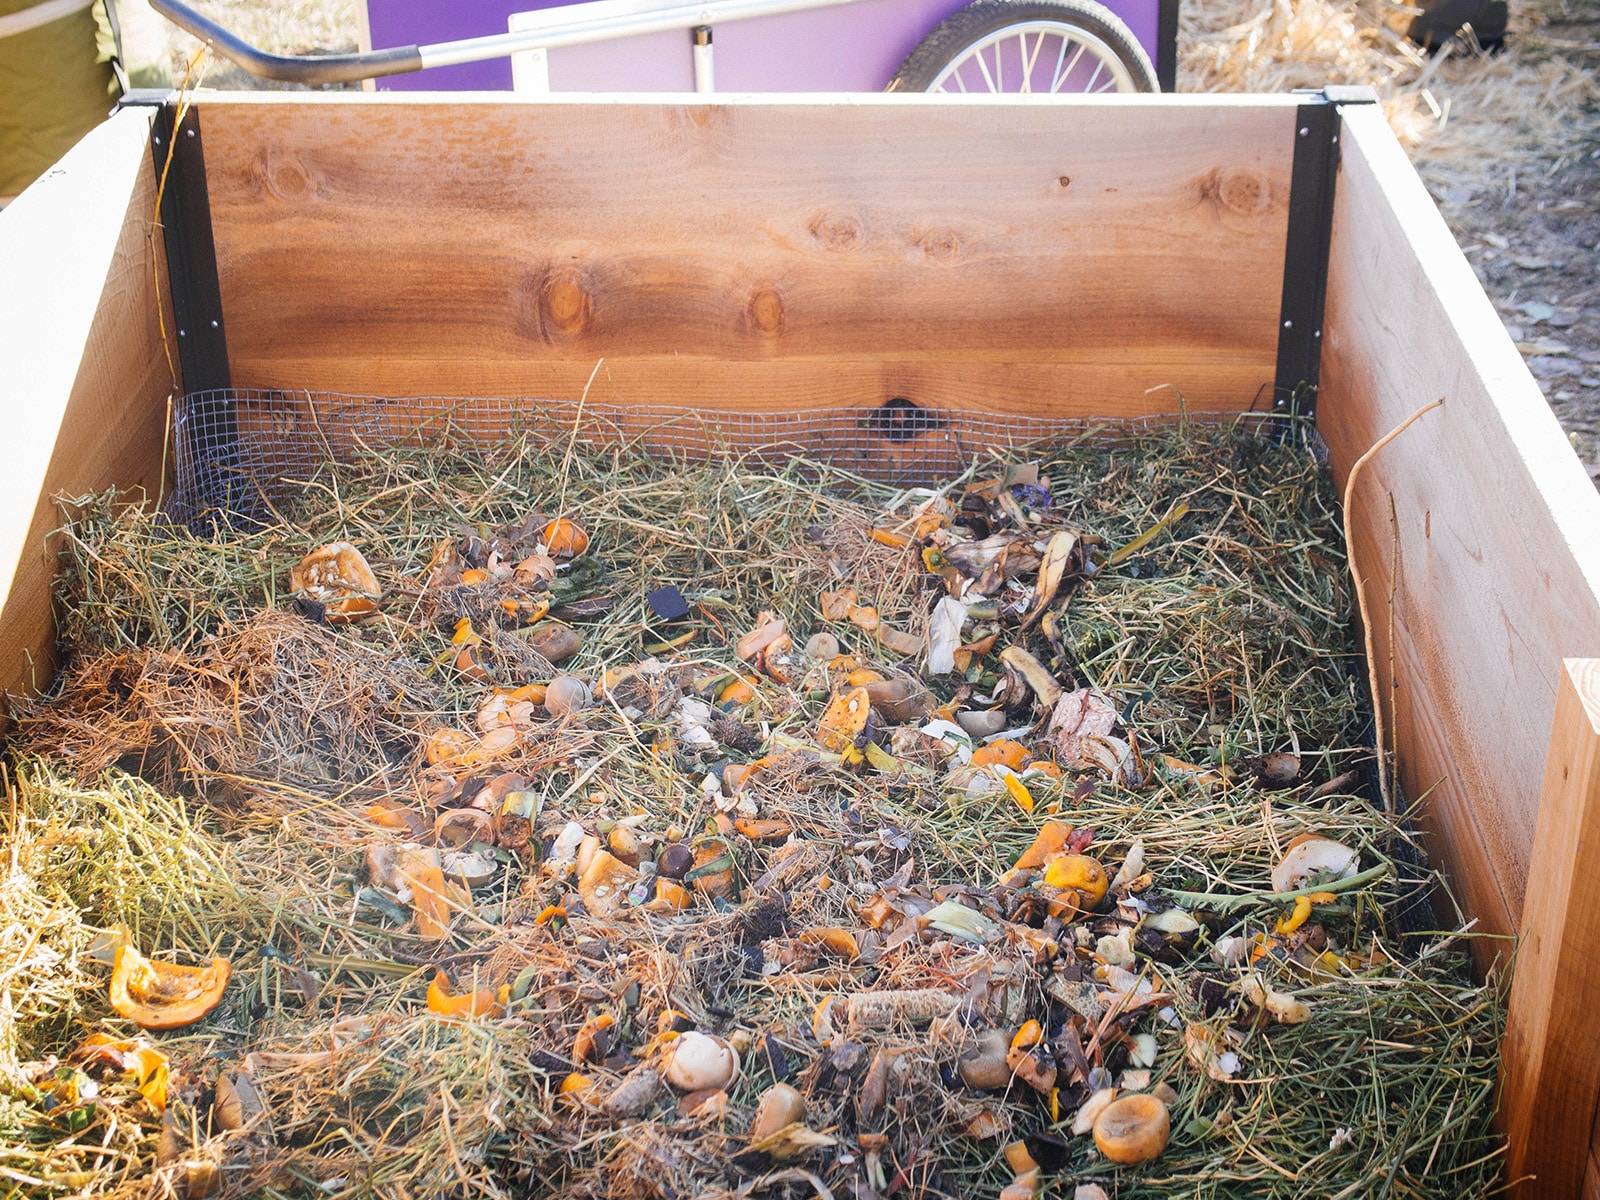 Food scraps composting in place in a lasagna garden bed